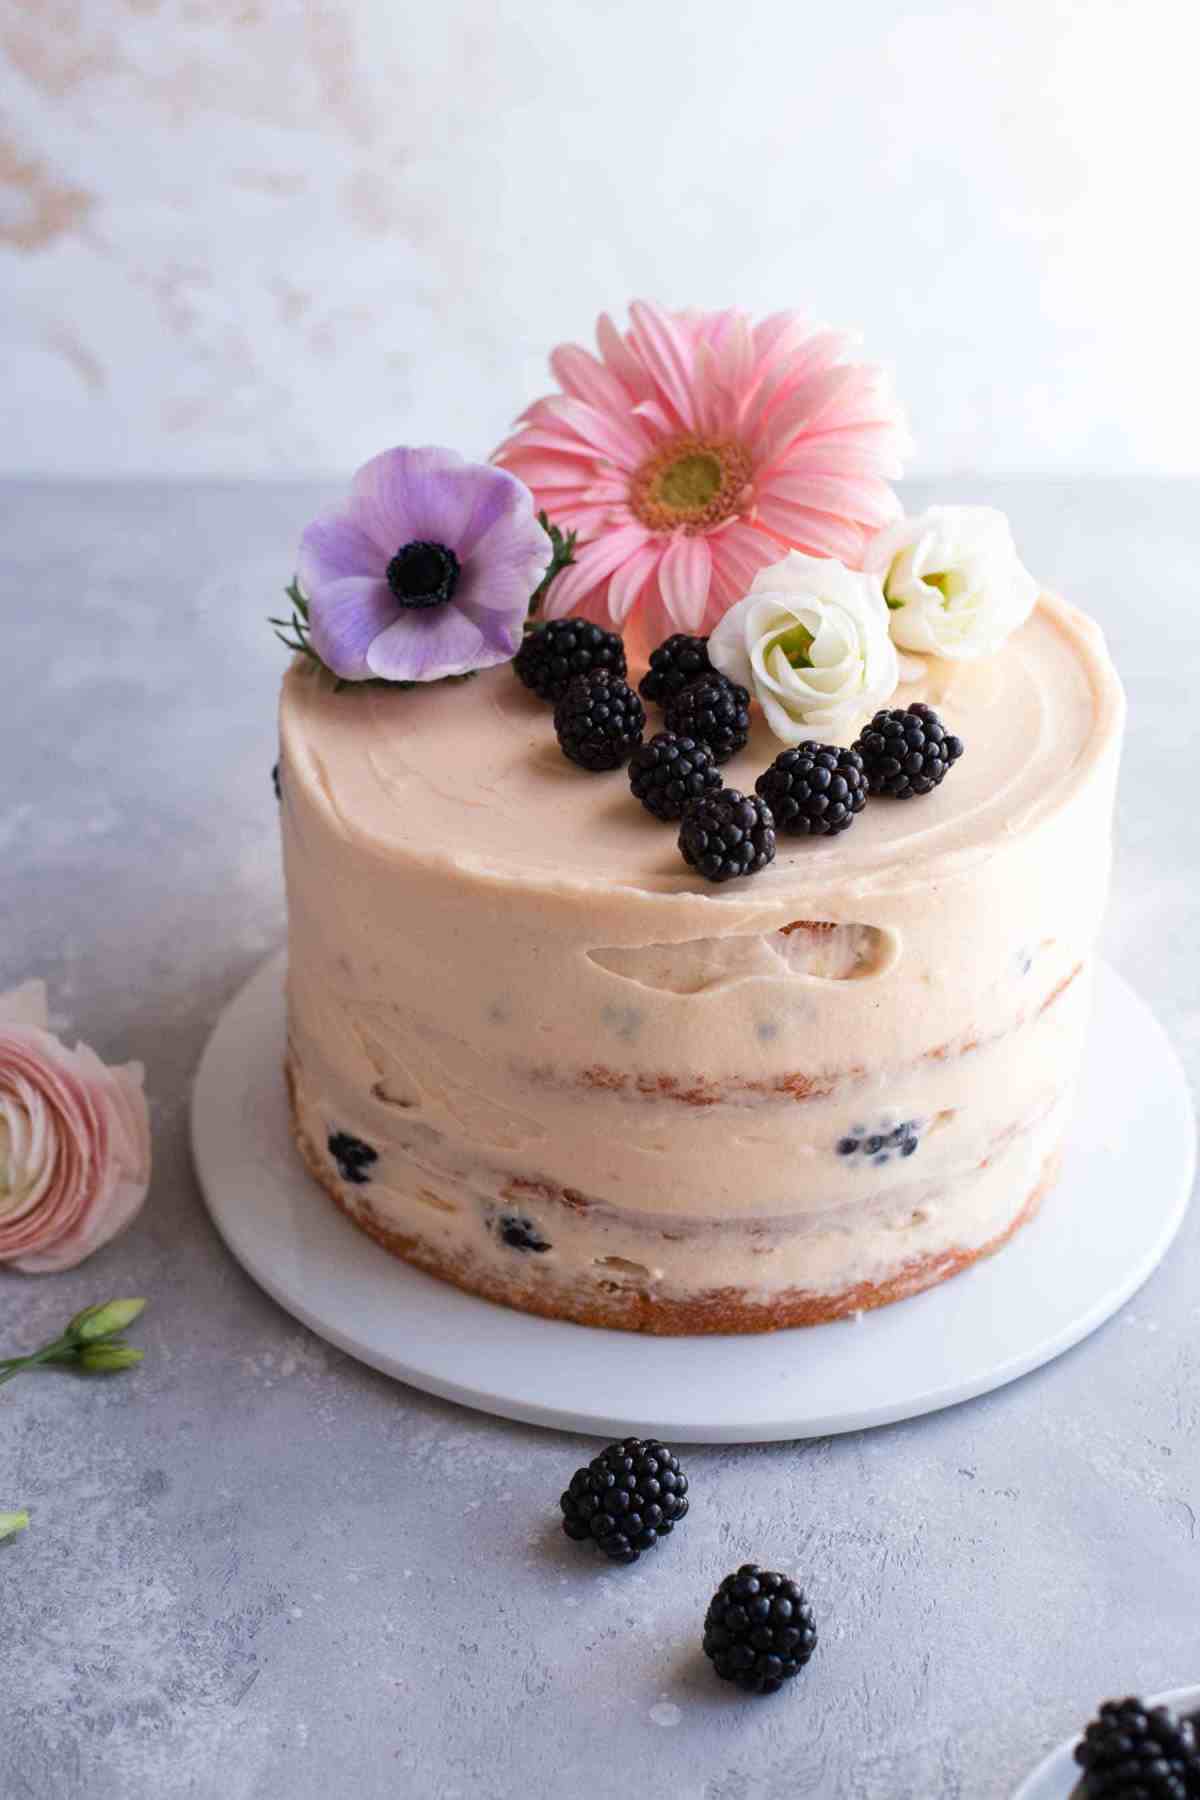 Decorated cake with flowers on top